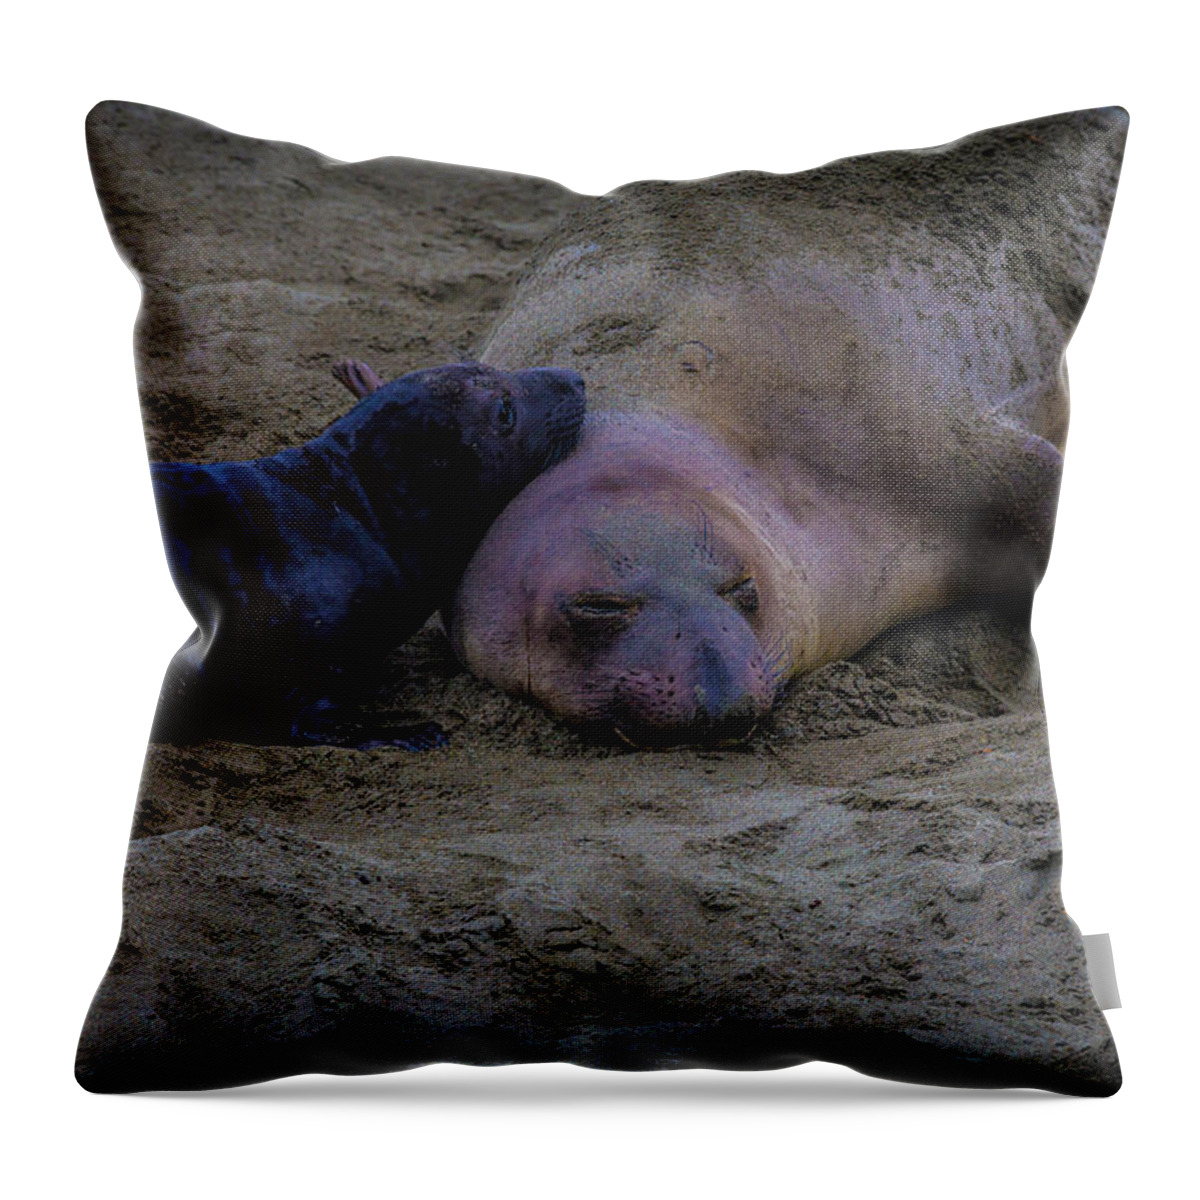 Elephant Throw Pillow featuring the photograph Elephant Seals Mom And Pup by Garry Gay